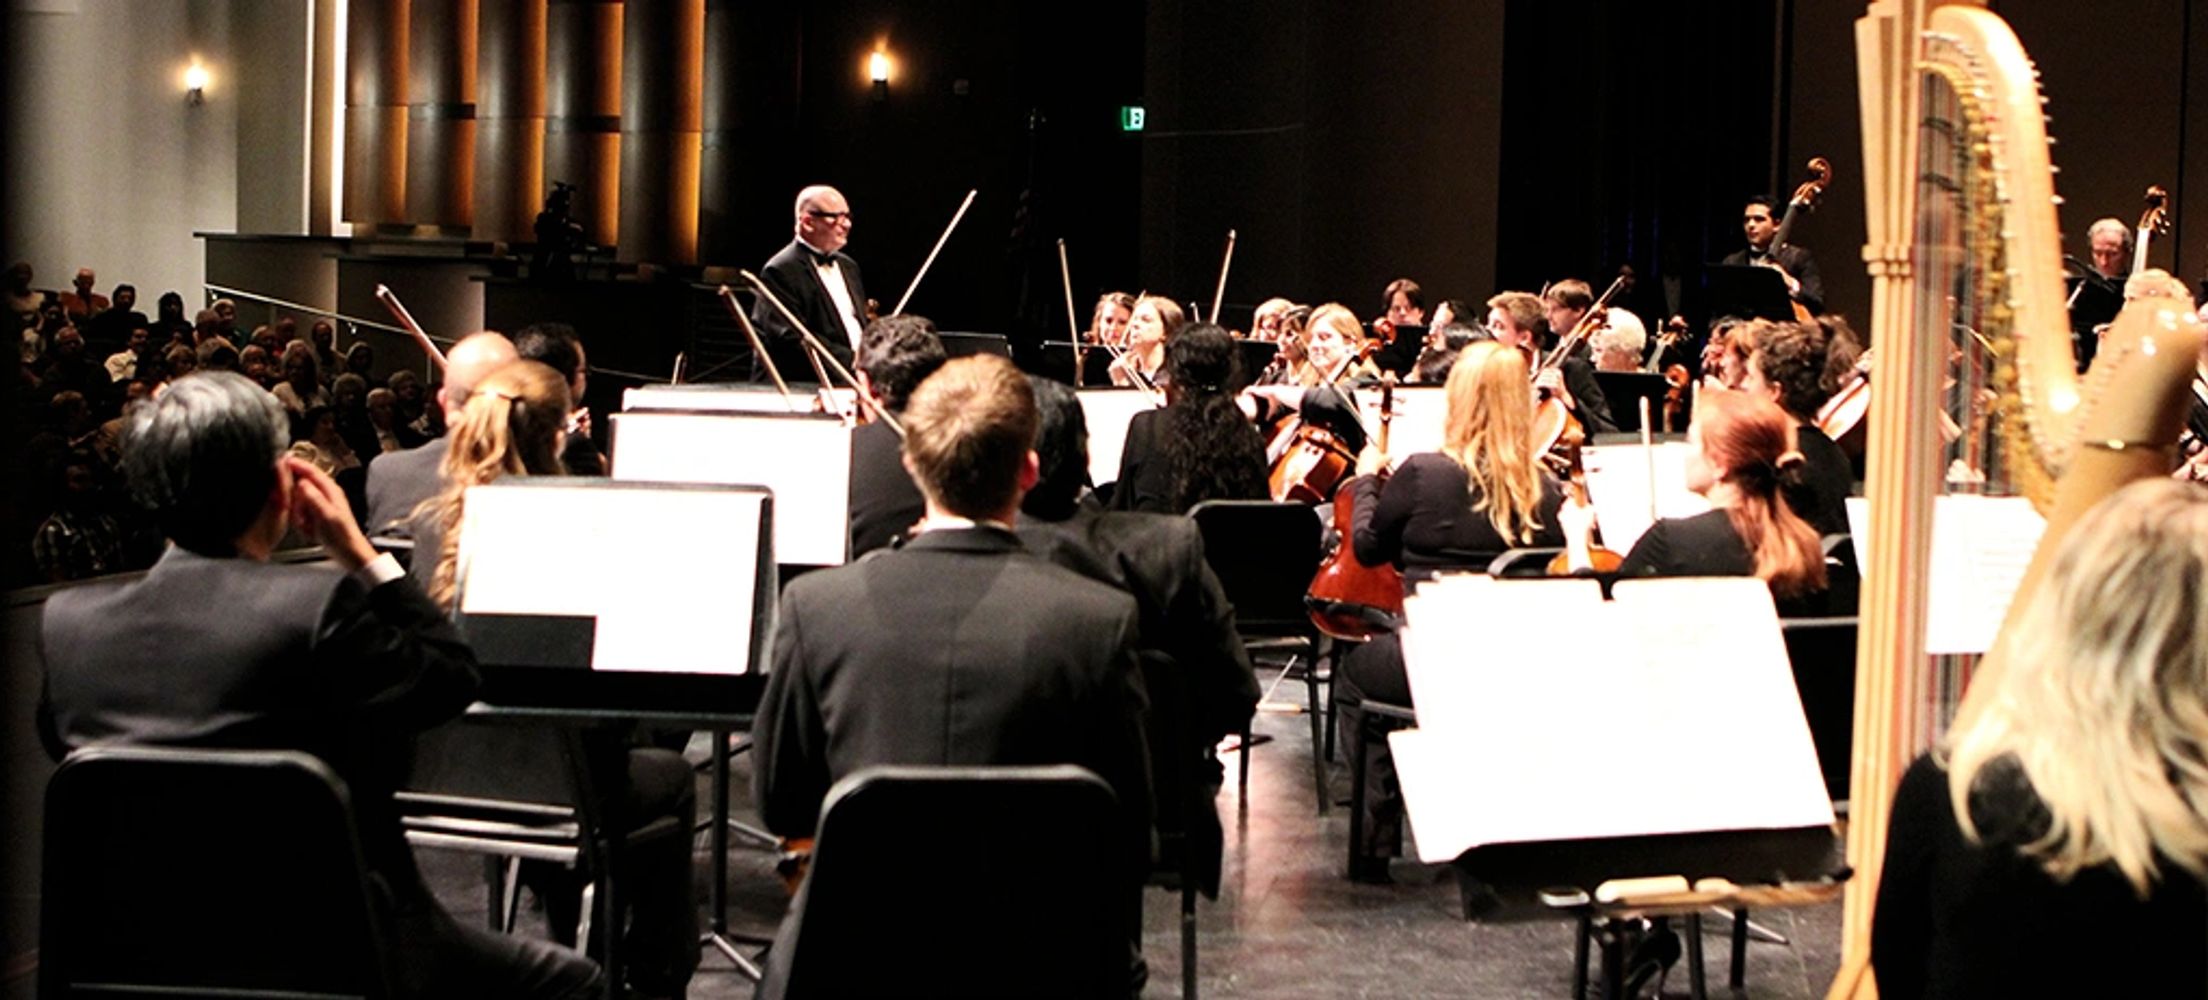 Victoria Symphony Orchestra Concertmaster Steven McMillan prepares the ensemble for a performance.